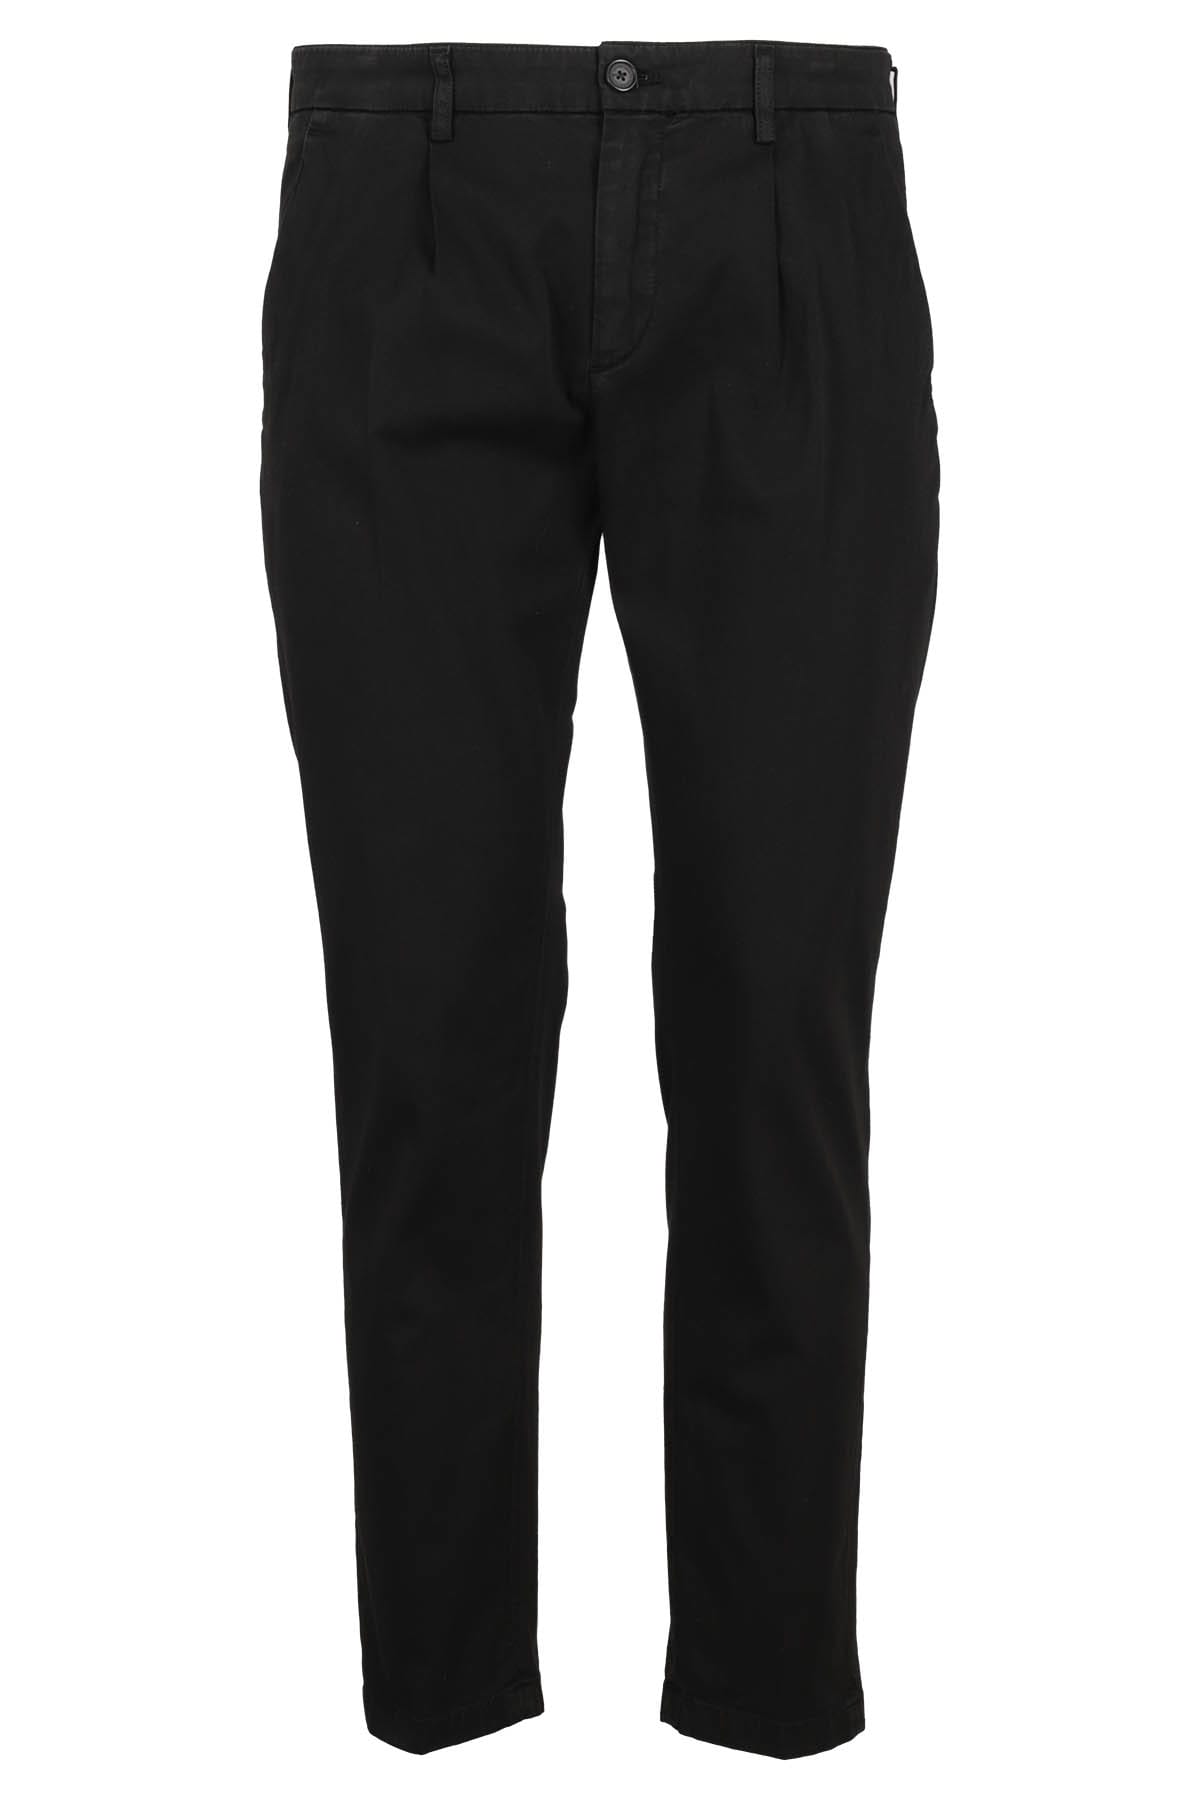 Department Five Prince Pences Chinos In Nero